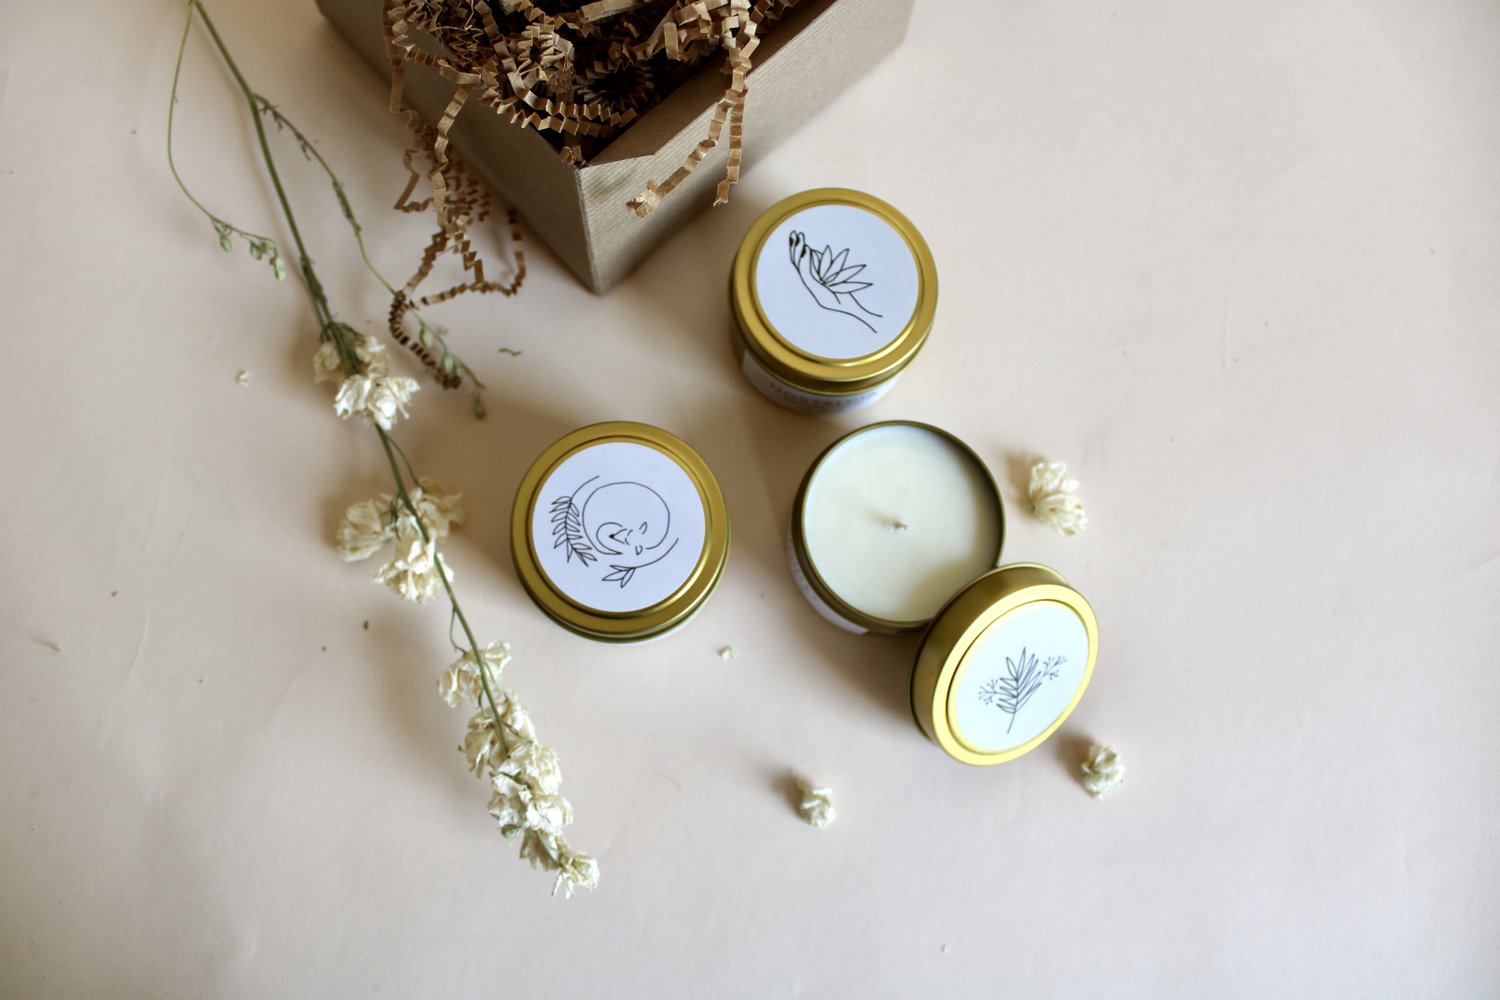 Wholesale Pricing, Soy Candles for Resale